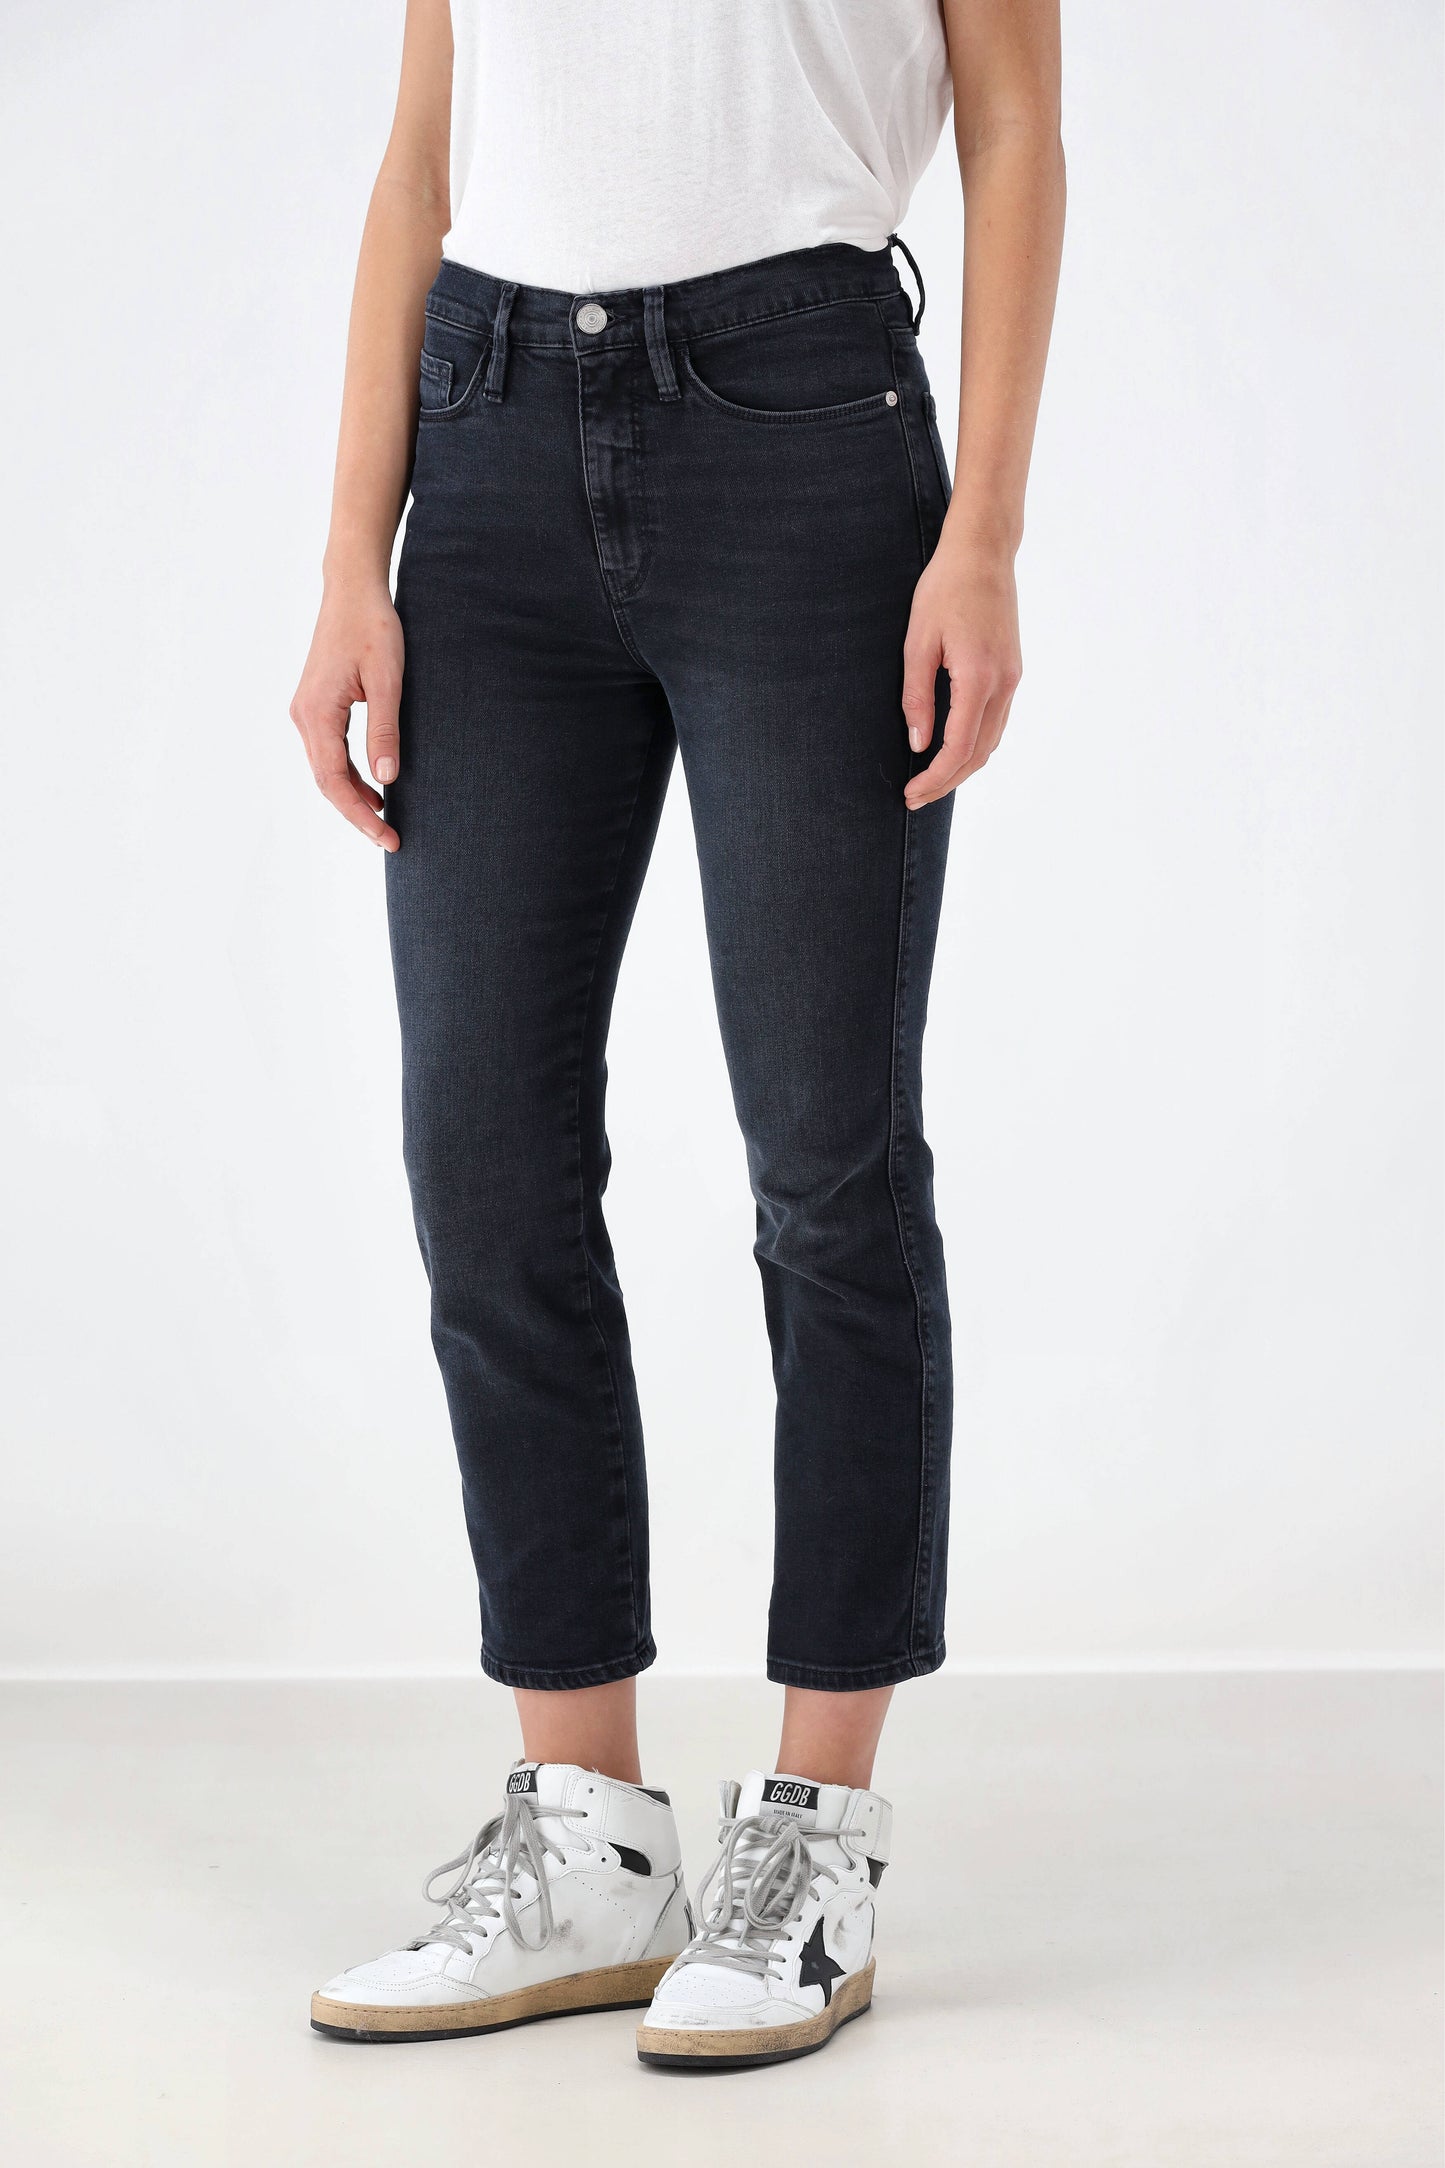 Jeans Le Pixie Sylvie in PlymouthFrame - Anita Hass